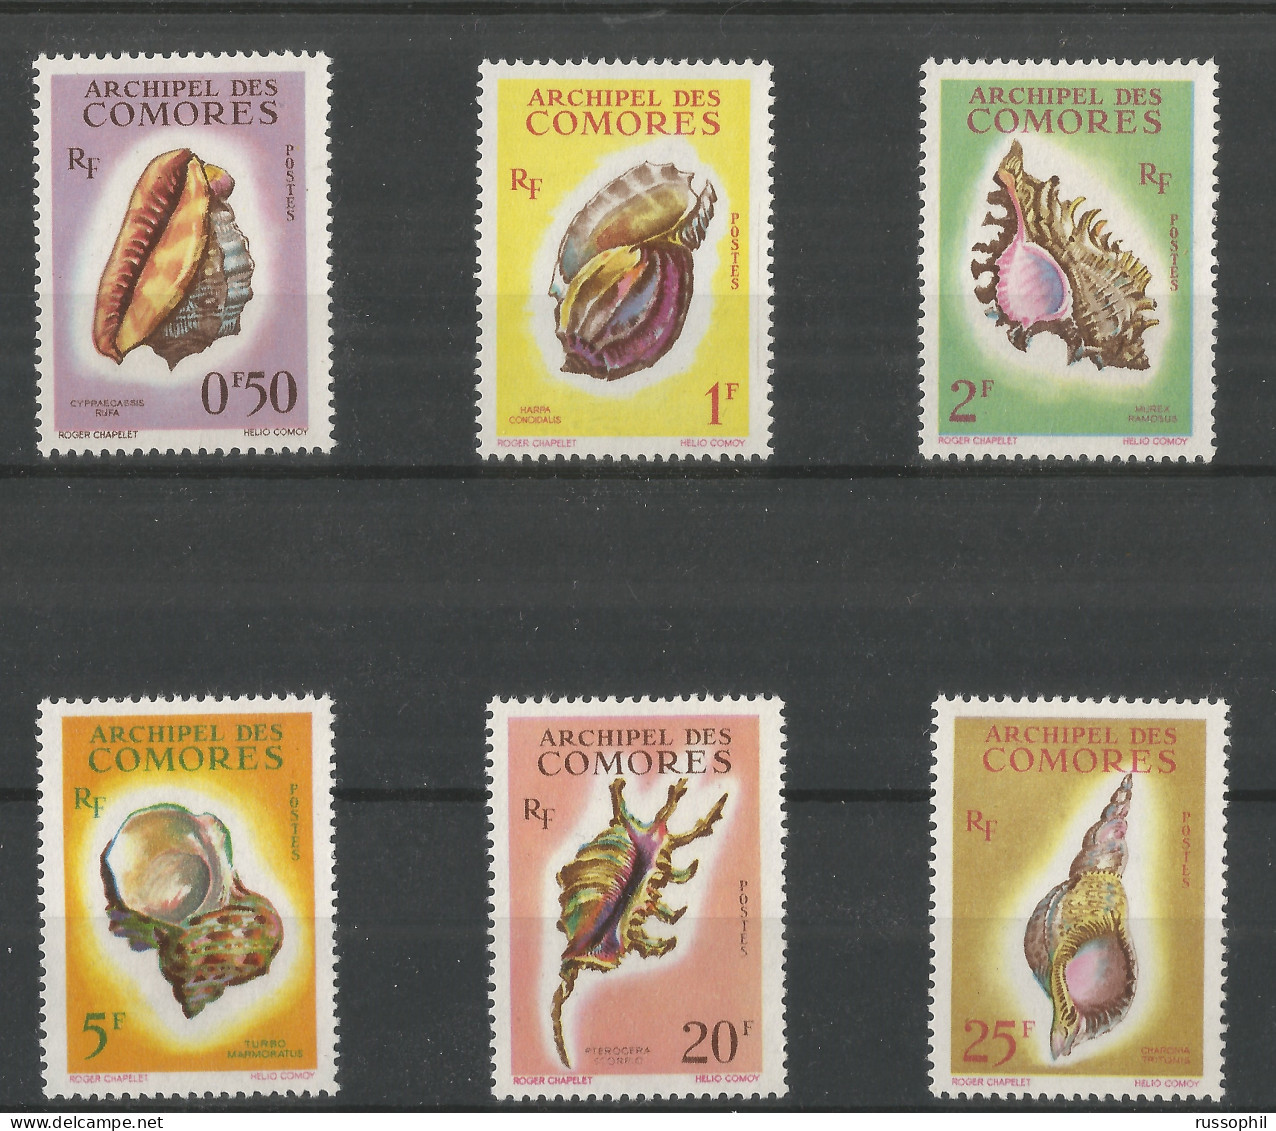 COMORES - COQUILLAGES -  SHELLFISH - Yv. #19 TO Yv. #24 -  (**/MNH) - 1962 - Nuovi